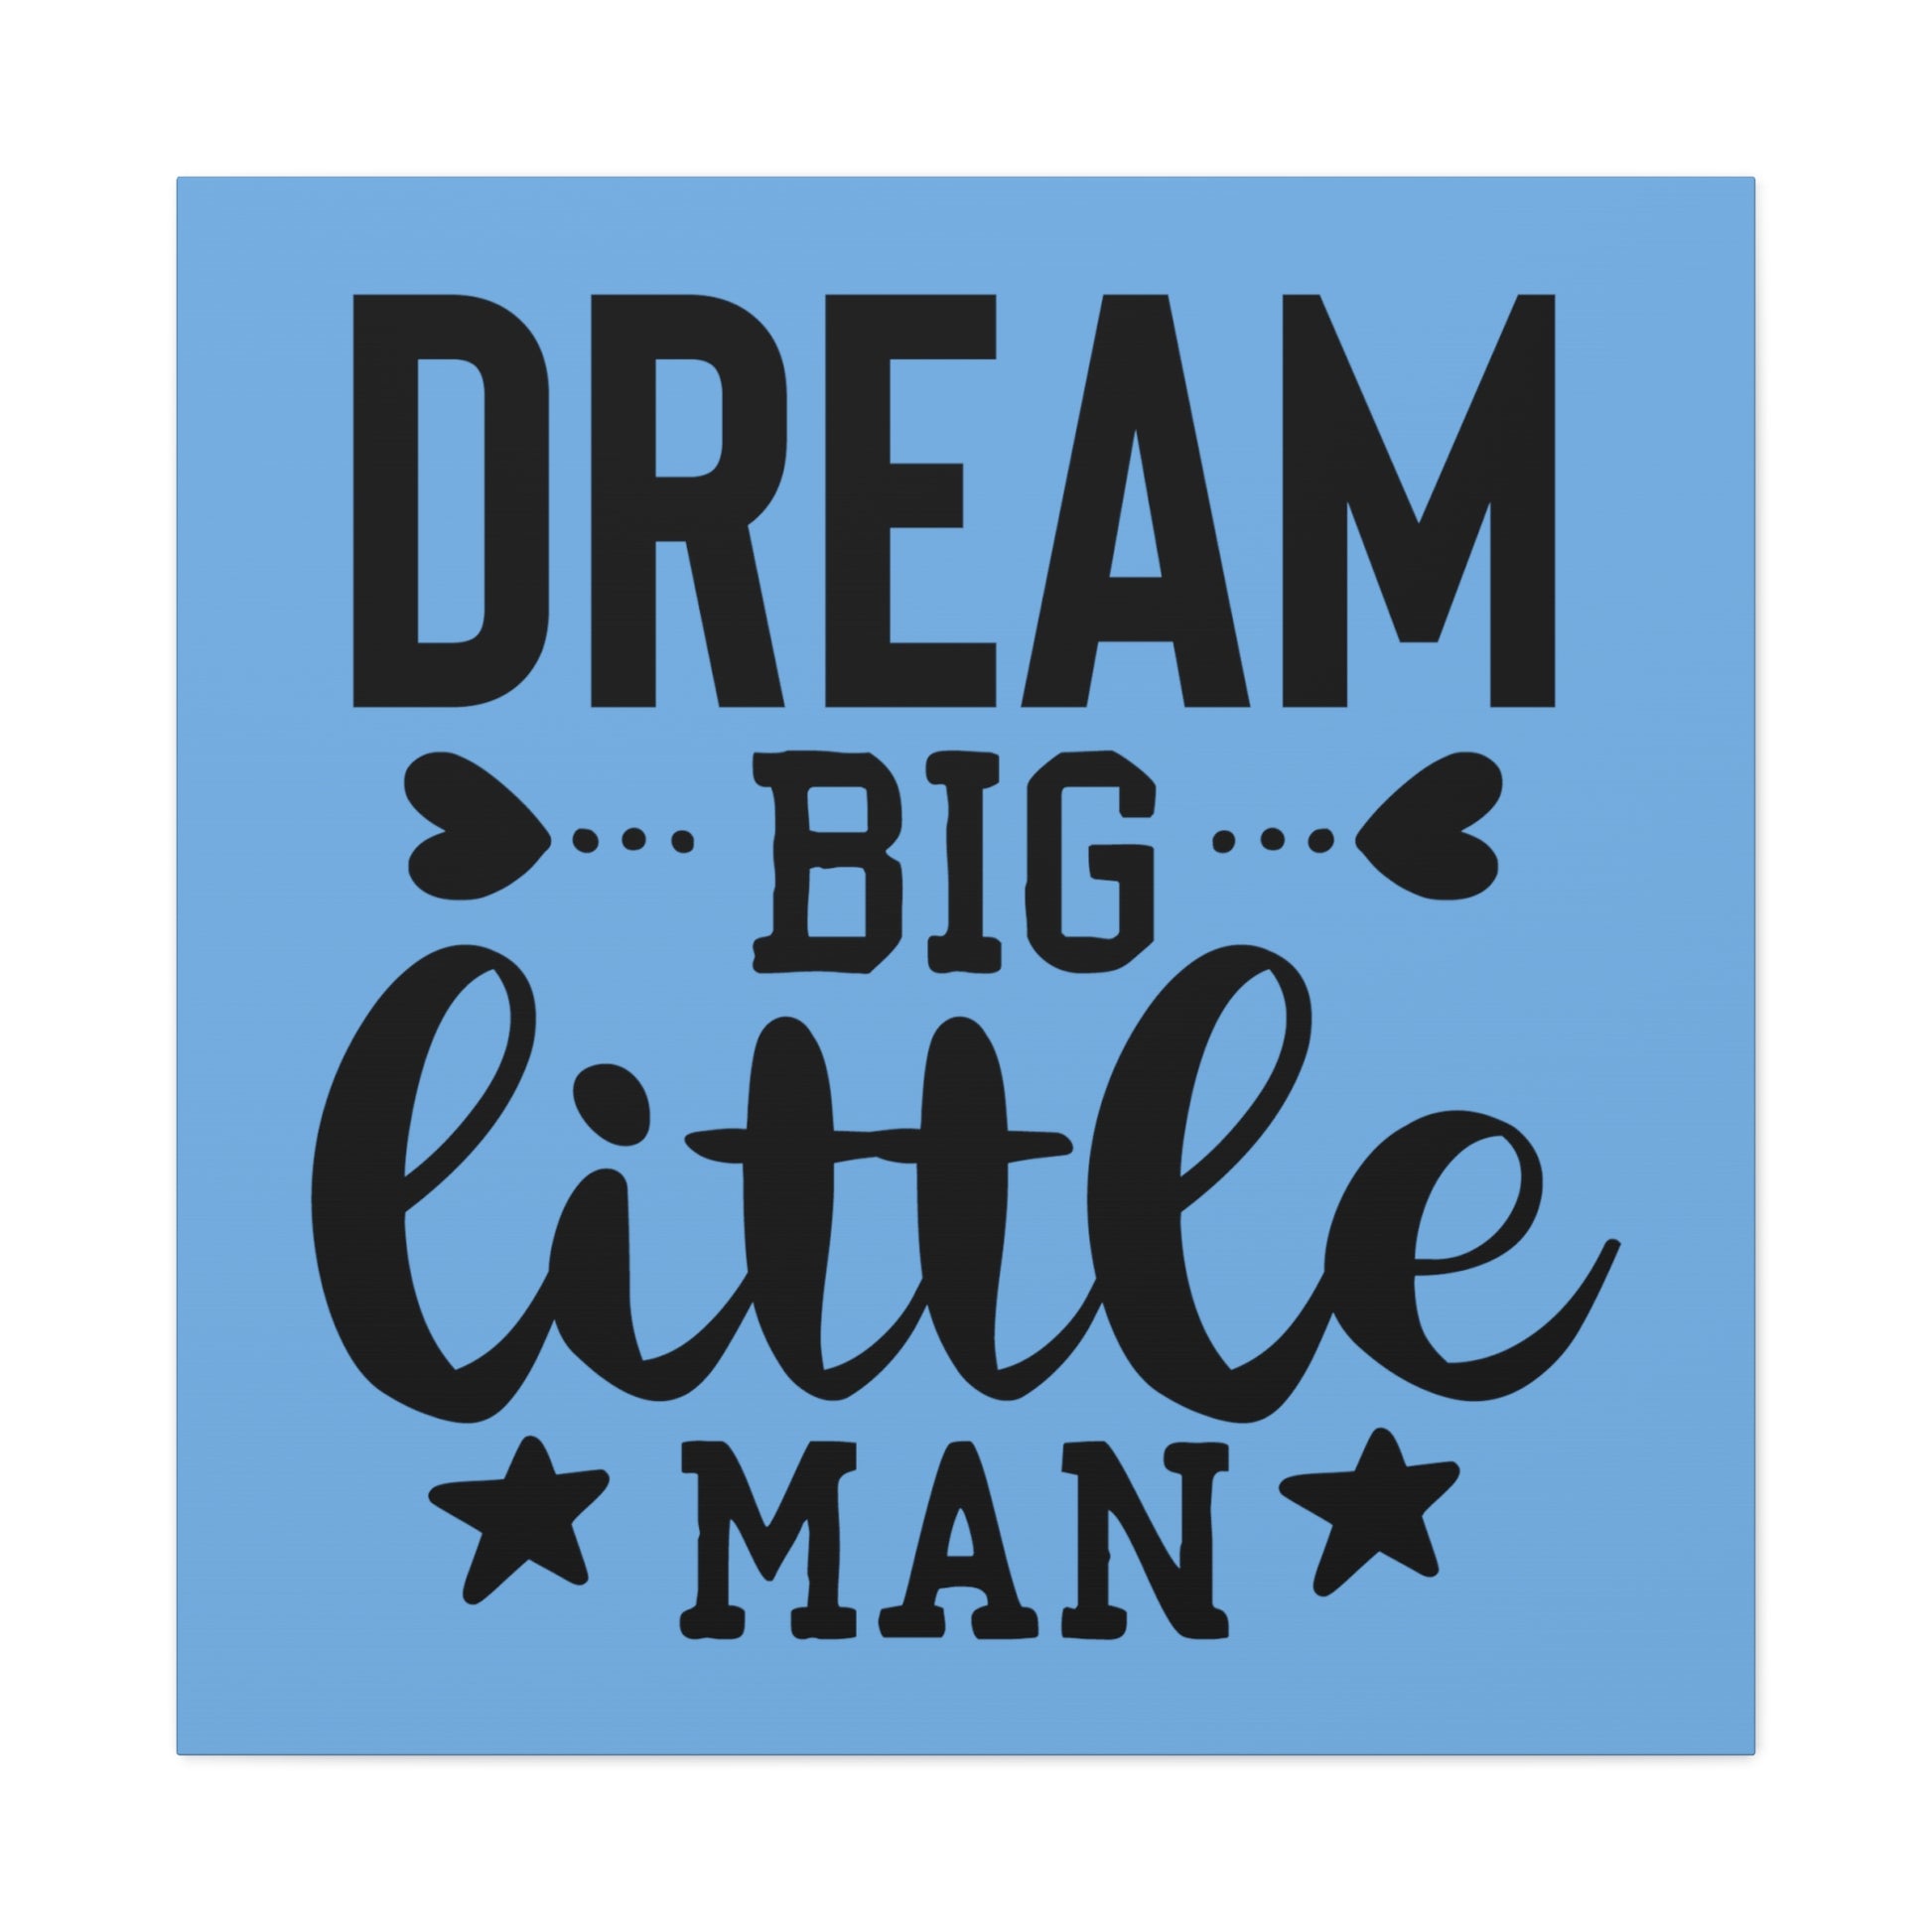 "Dream Big Little Man" Wall Art - Weave Got Gifts - Unique Gifts You Won’t Find Anywhere Else!